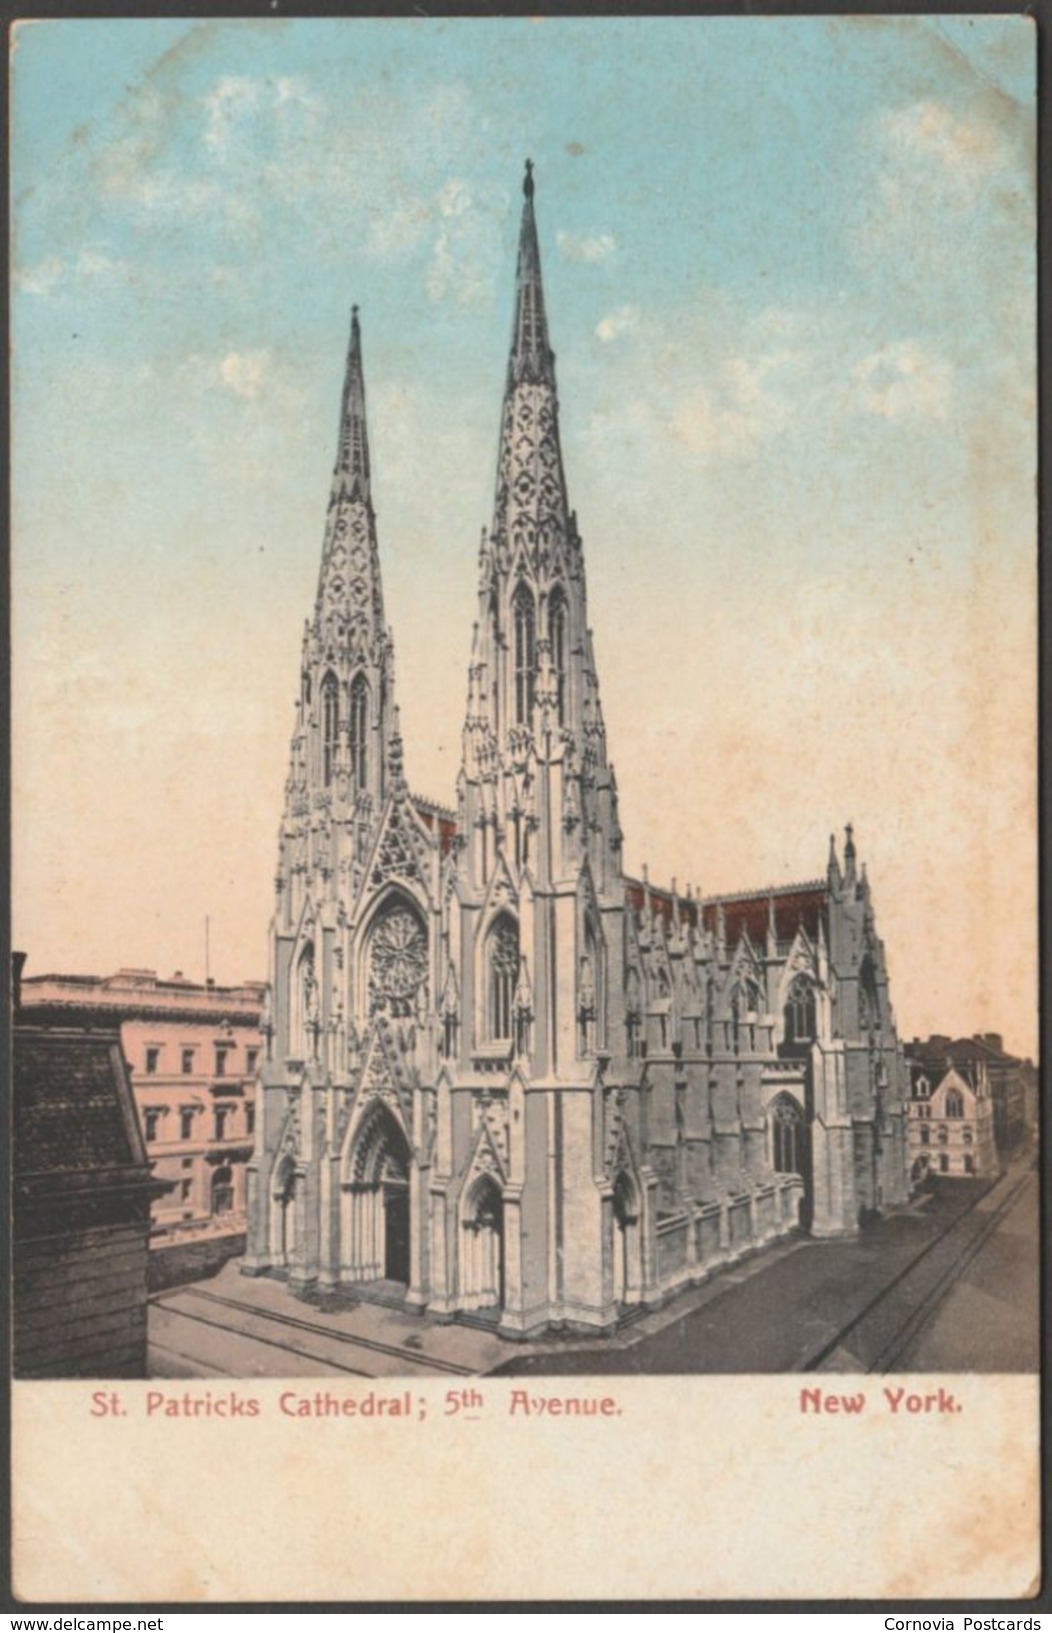 St Patrick's Cathedral, New York City, C.1905 - American News Co Postcard - Churches